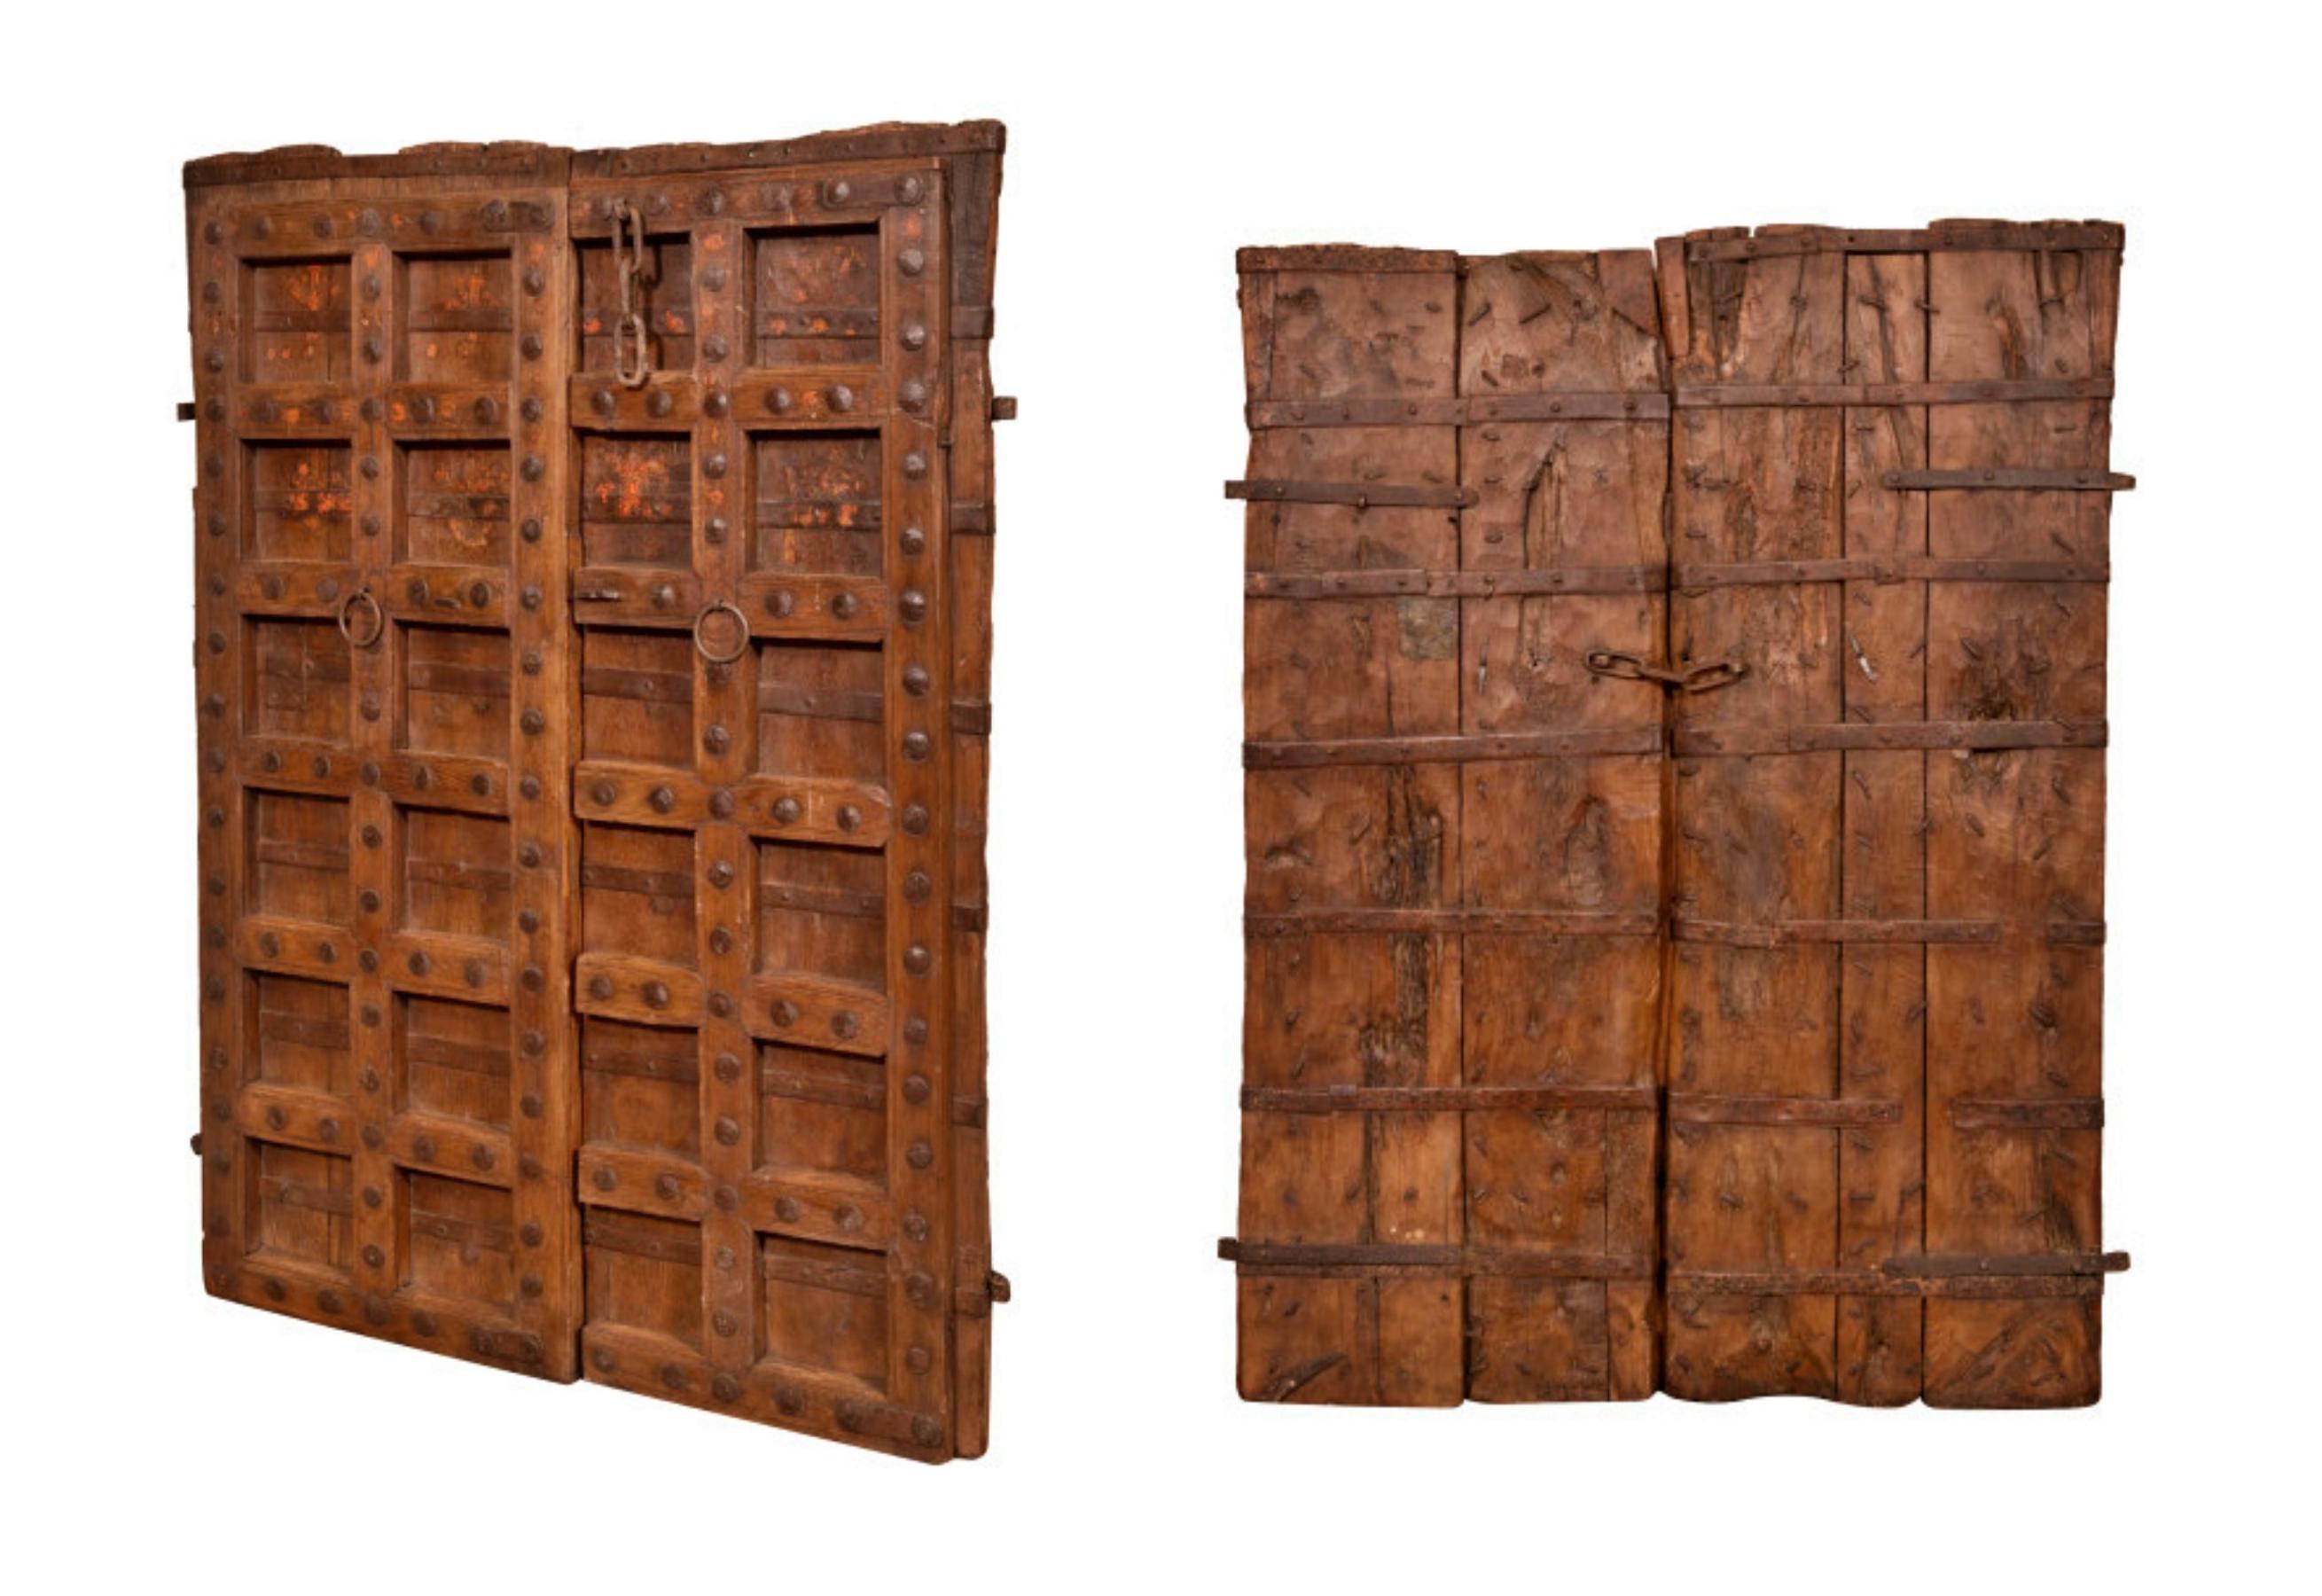 Amazing solid wood and iron door, 17th century

Antique solid teak door with dimensions of 140 cm in length, 10 cm in depth and 172 cm in height. This door comes from the demolition and restoration of important old buildings. Finely restored and